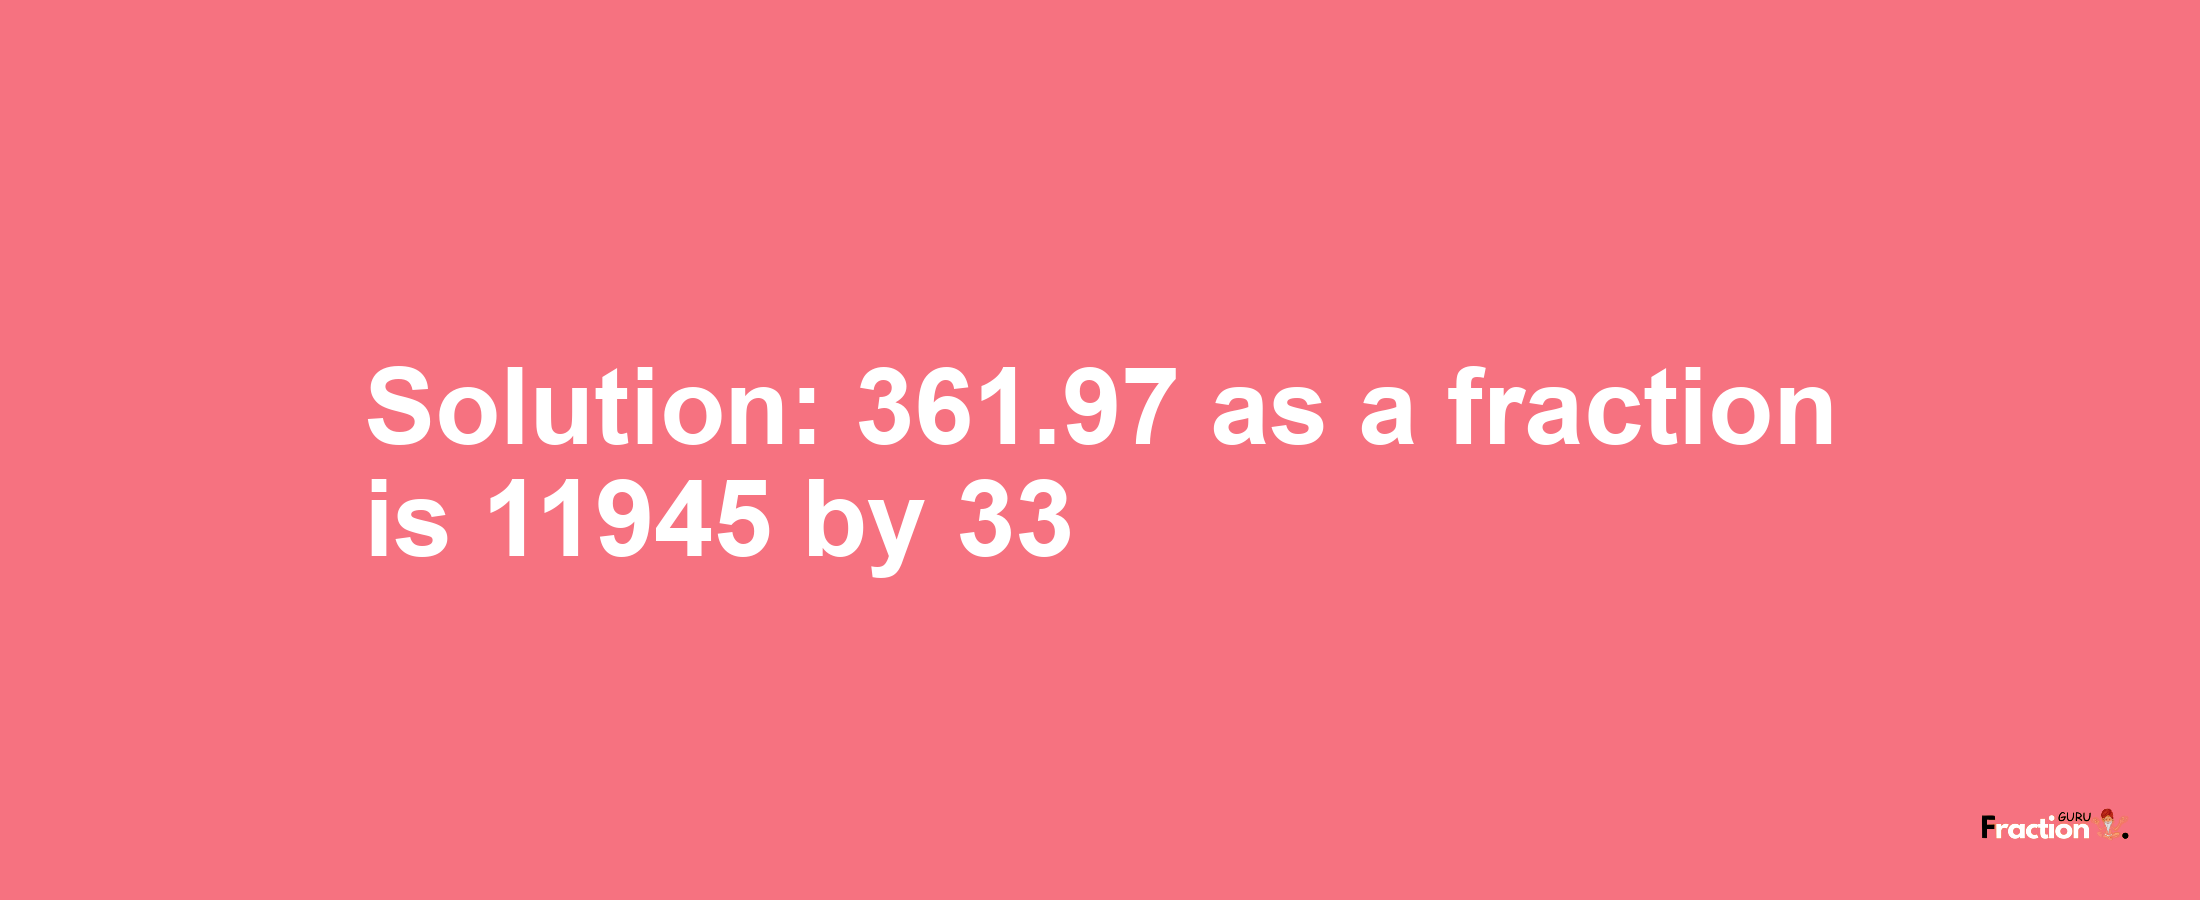 Solution:361.97 as a fraction is 11945/33